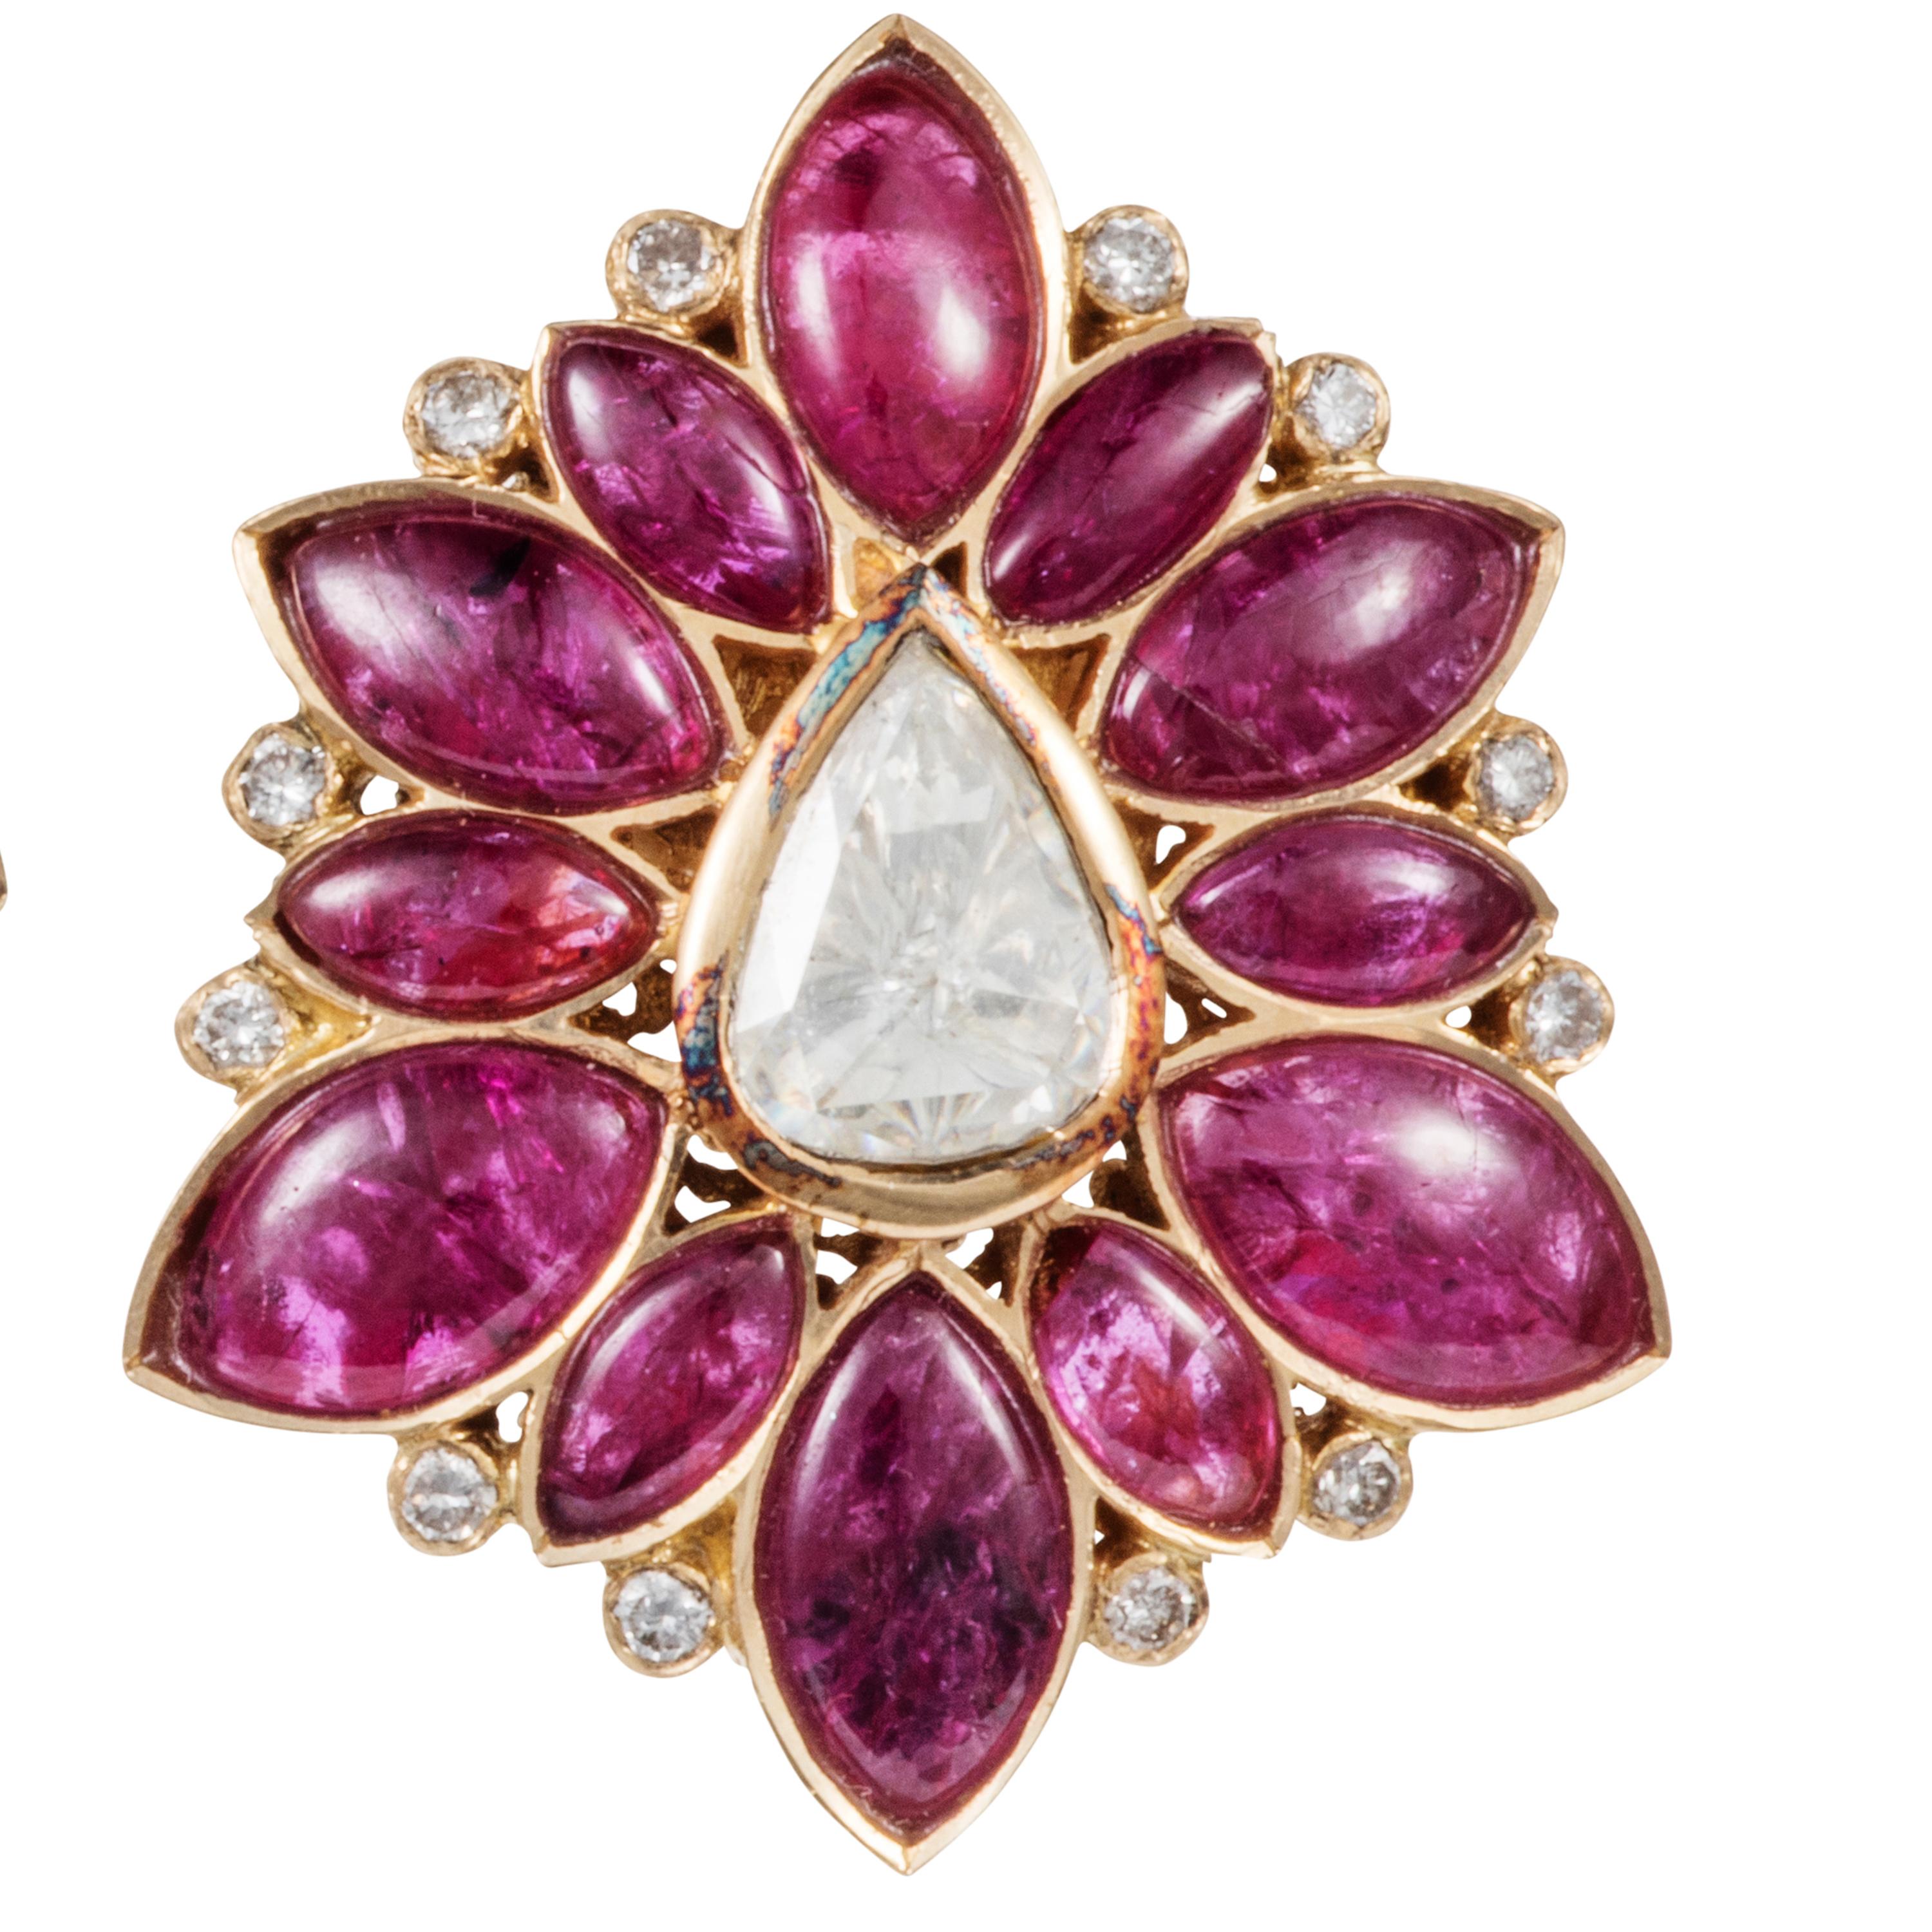 Gross weight: 14.550 grams 
Gold weight: 12.610 grams 
Rose-Cut diamonds weight: 0.73 carats 
Diamond weight: 0.29 carats  
Ruby weight: 8.26 carats 

A beautiful rose-cut diamond centrepiece is framed by romantic marquise cut-rubies.  

Each ruby